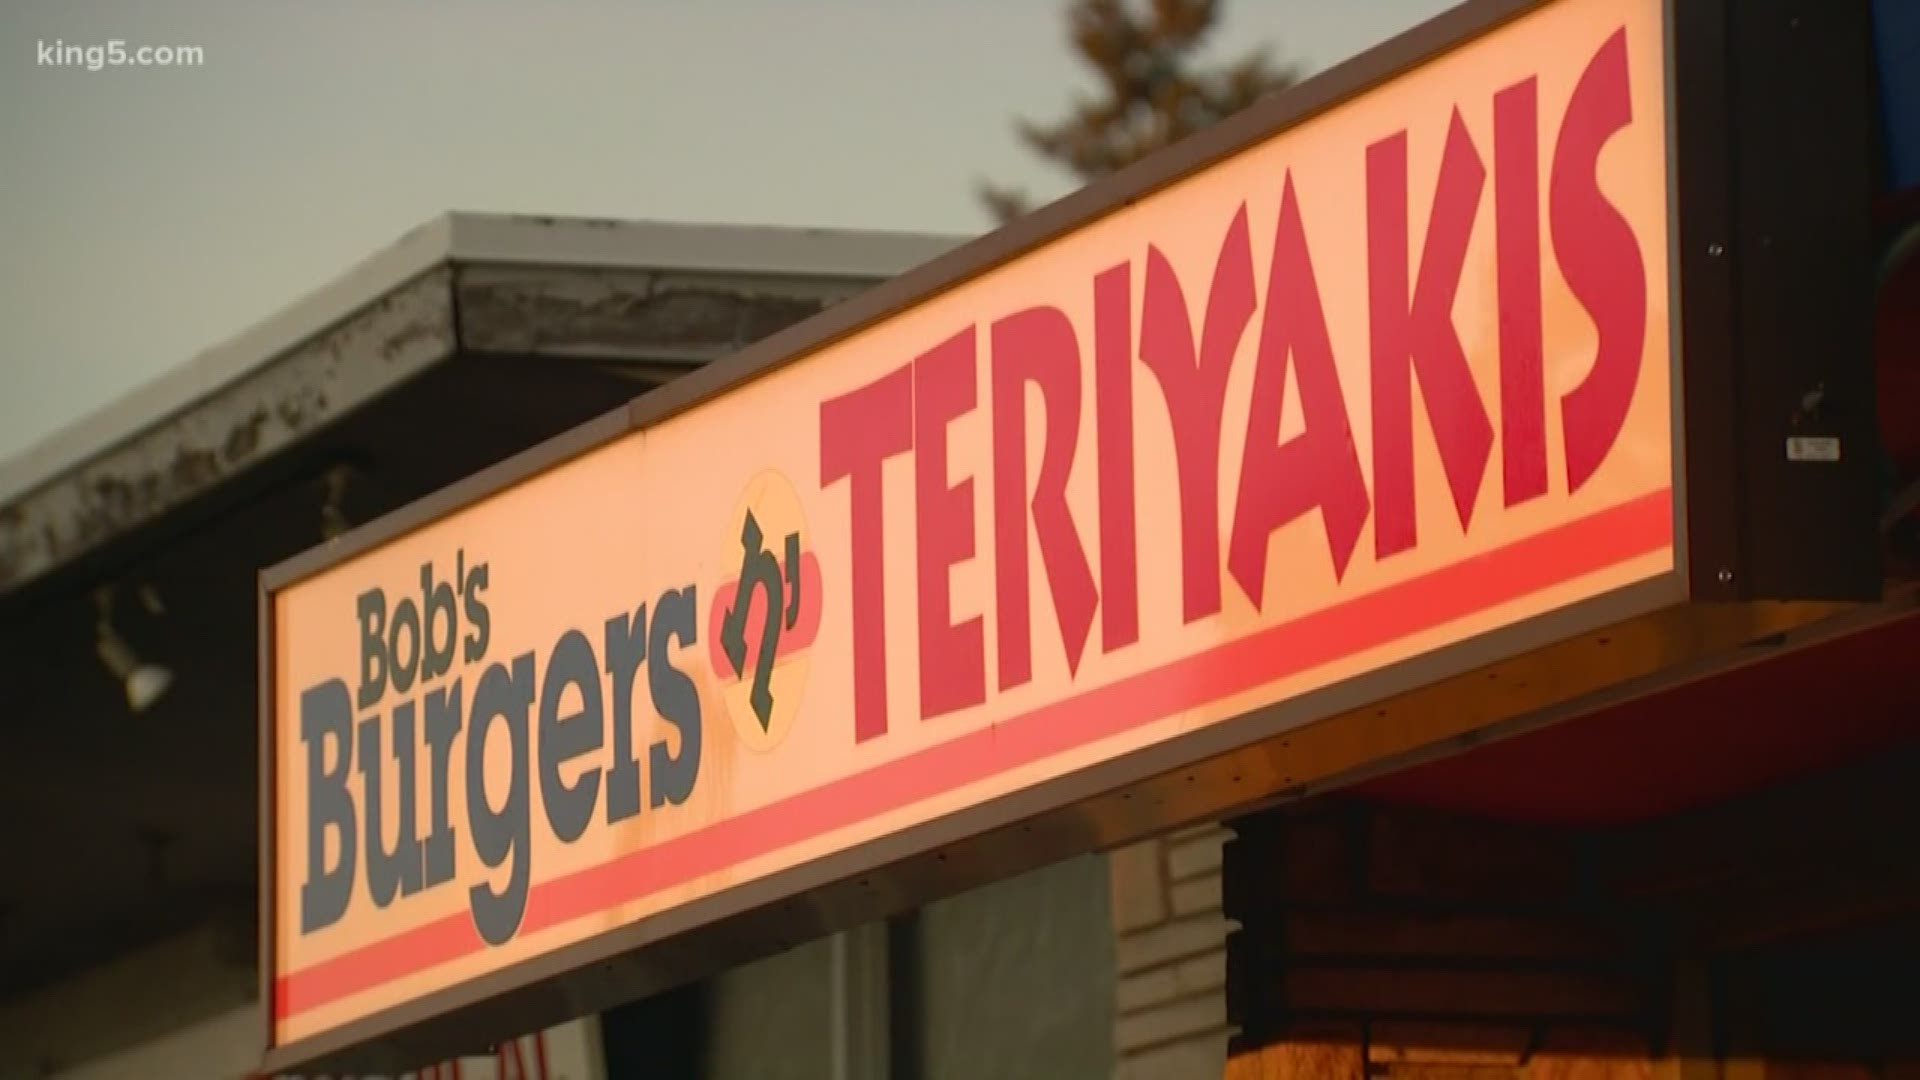 The King County Sheriff's office said the employees and customers of Bob's Burgers n' Teriyakis participated in an elaborate hoax the night of Oct. 19.